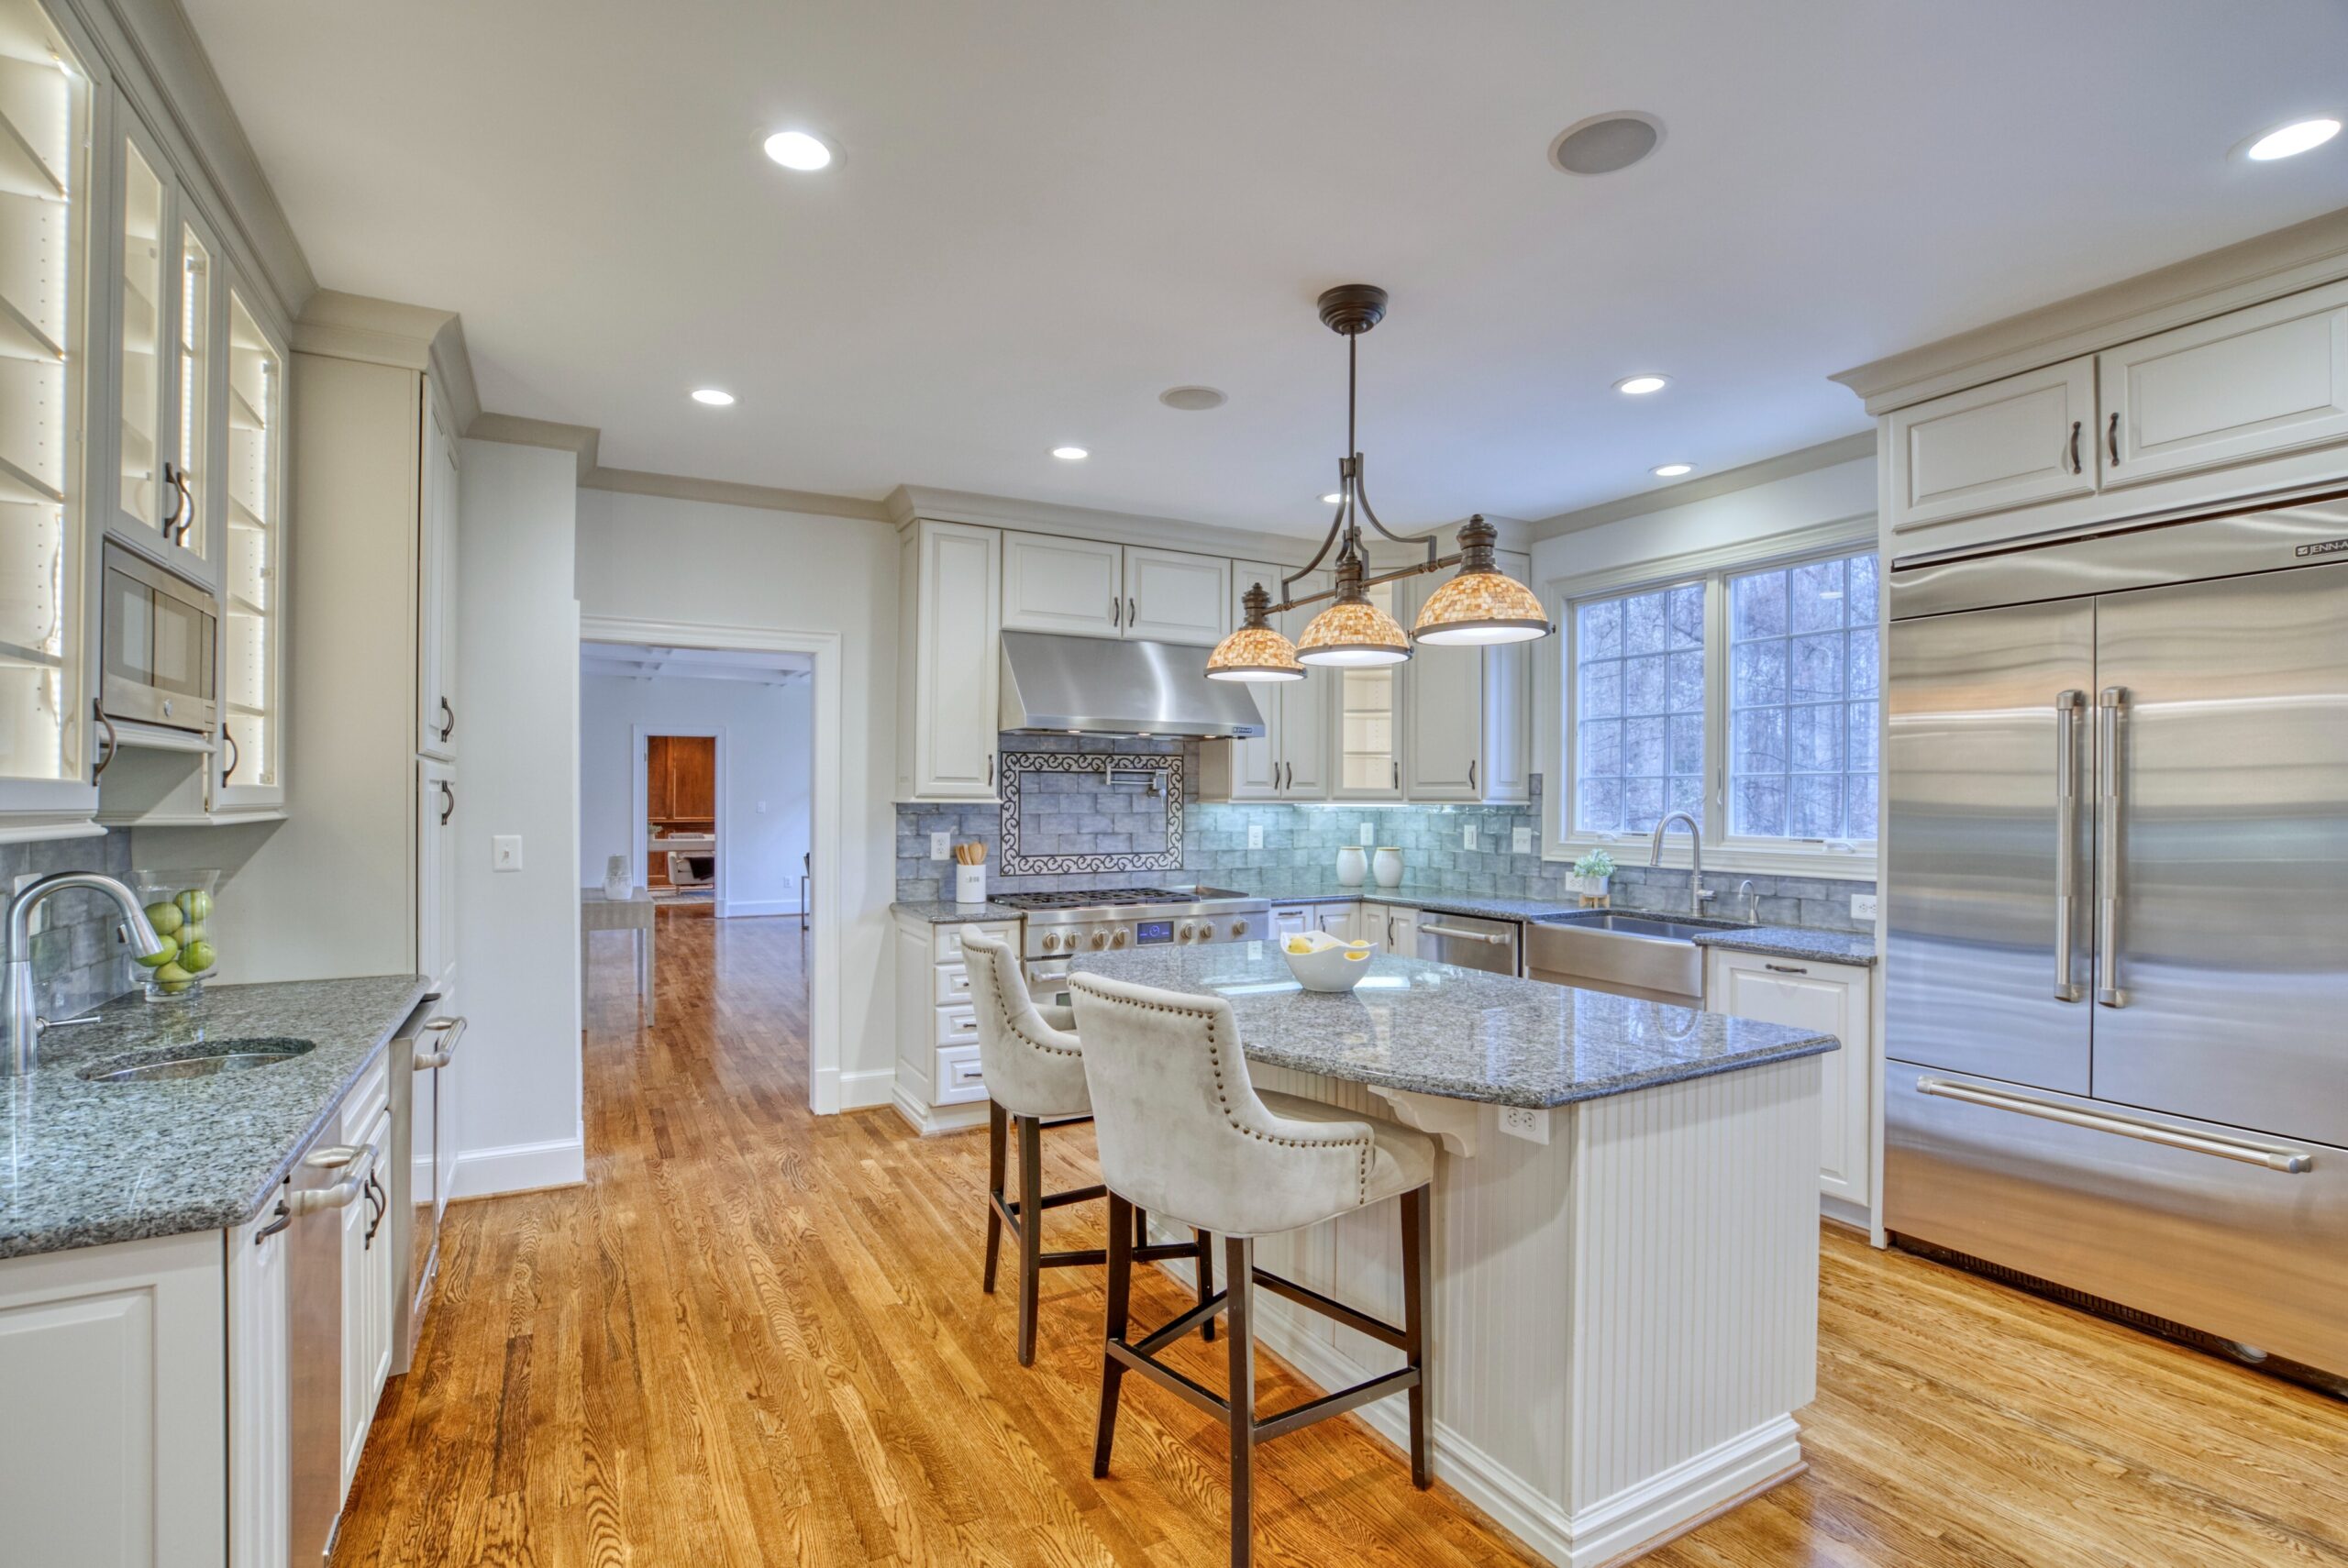 Professional interior photo of 718 Potomac Knolls Dr - showing the kitchen with stainless appliances, white cabinets, granite counters and 2 sinks